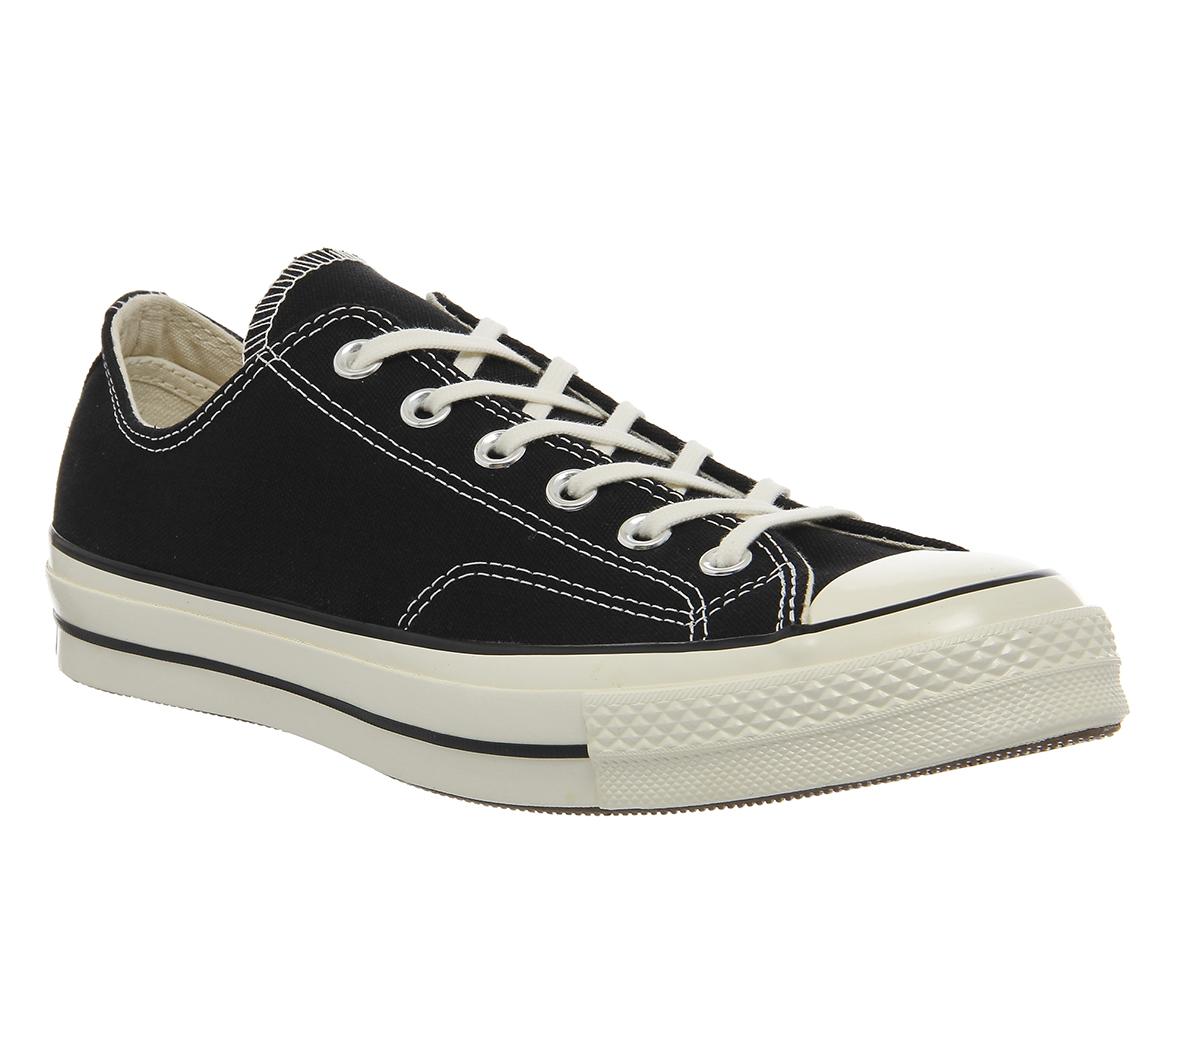 Converse All Star Ox 70s Trainers Black - His trainers